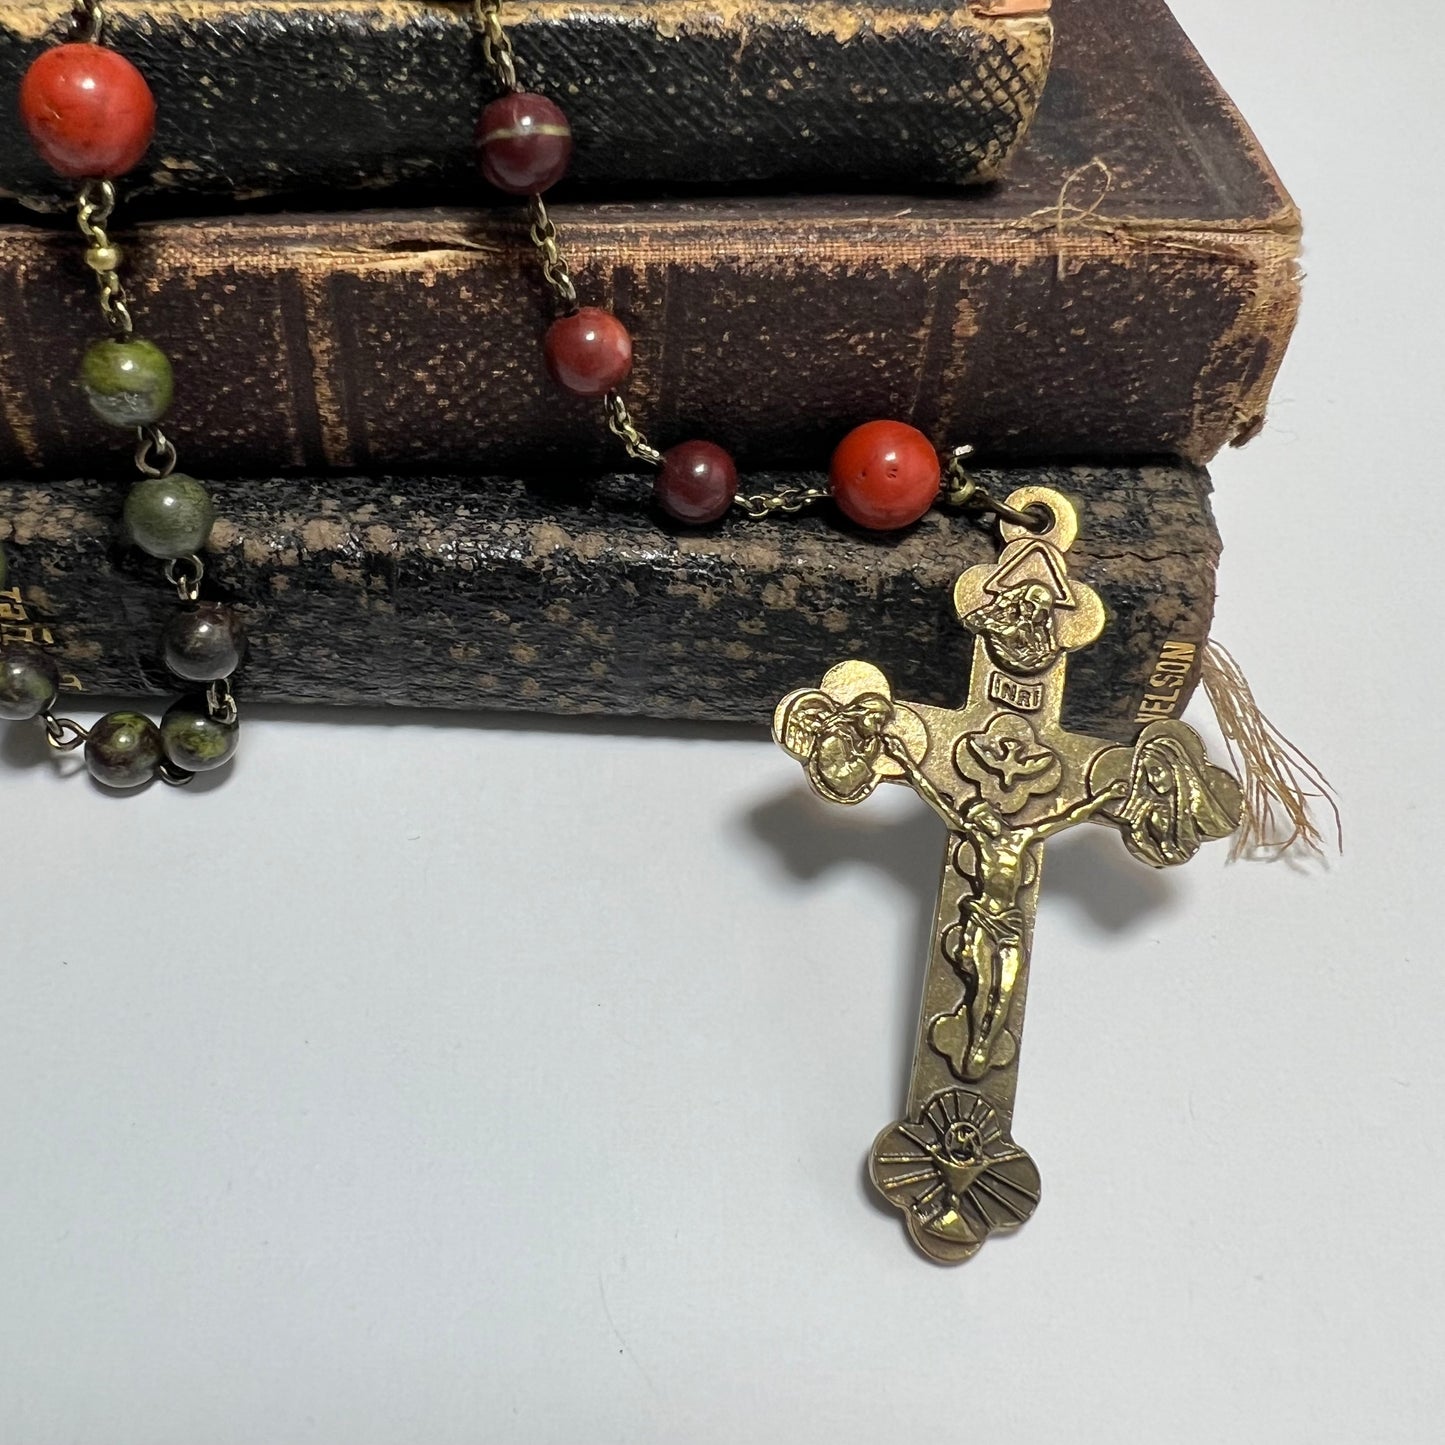 Our Lady of Fatima Rosary | Bloodstone & Red Jasper